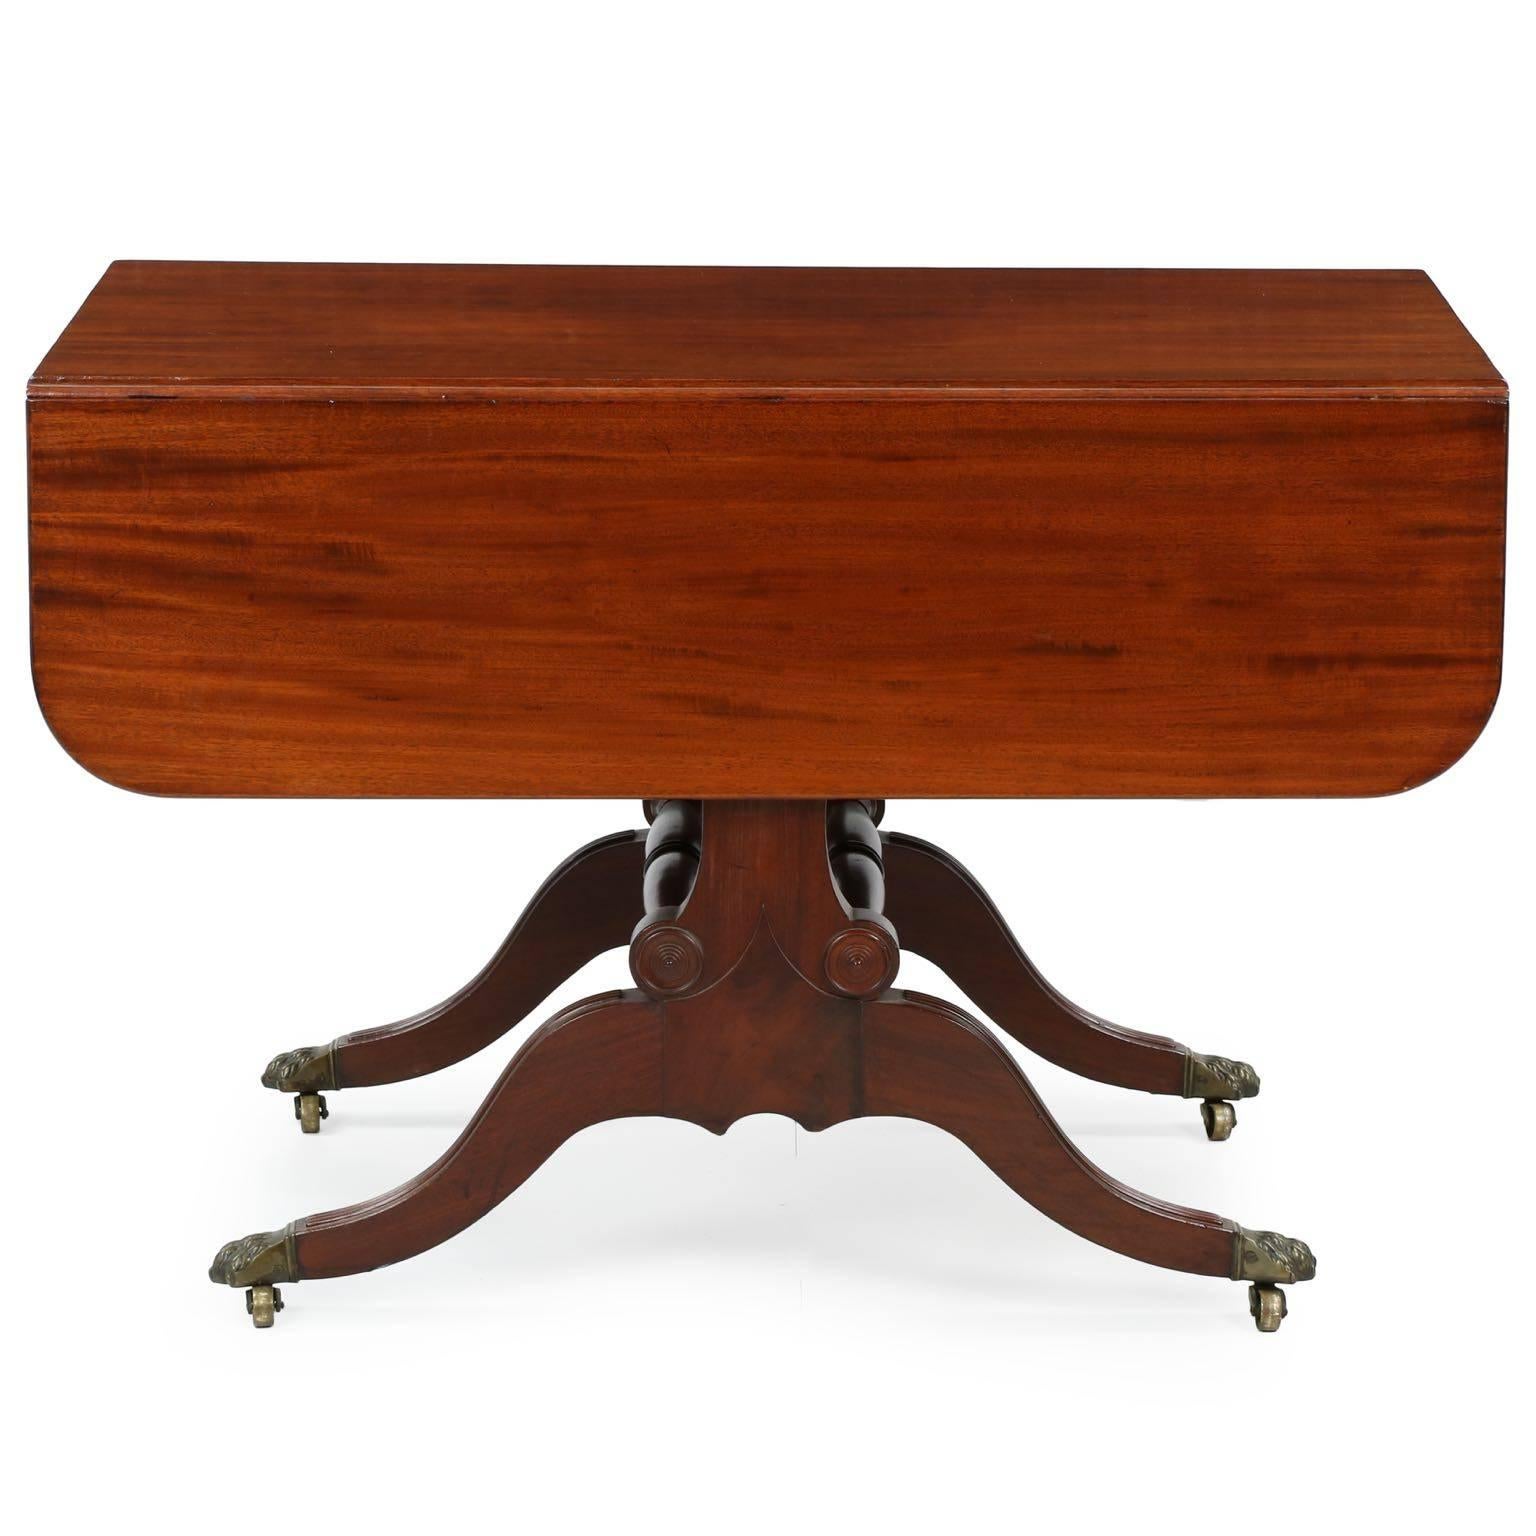 American Classical Mahogany Antique Breakfast Table, New York, 19th Century 1